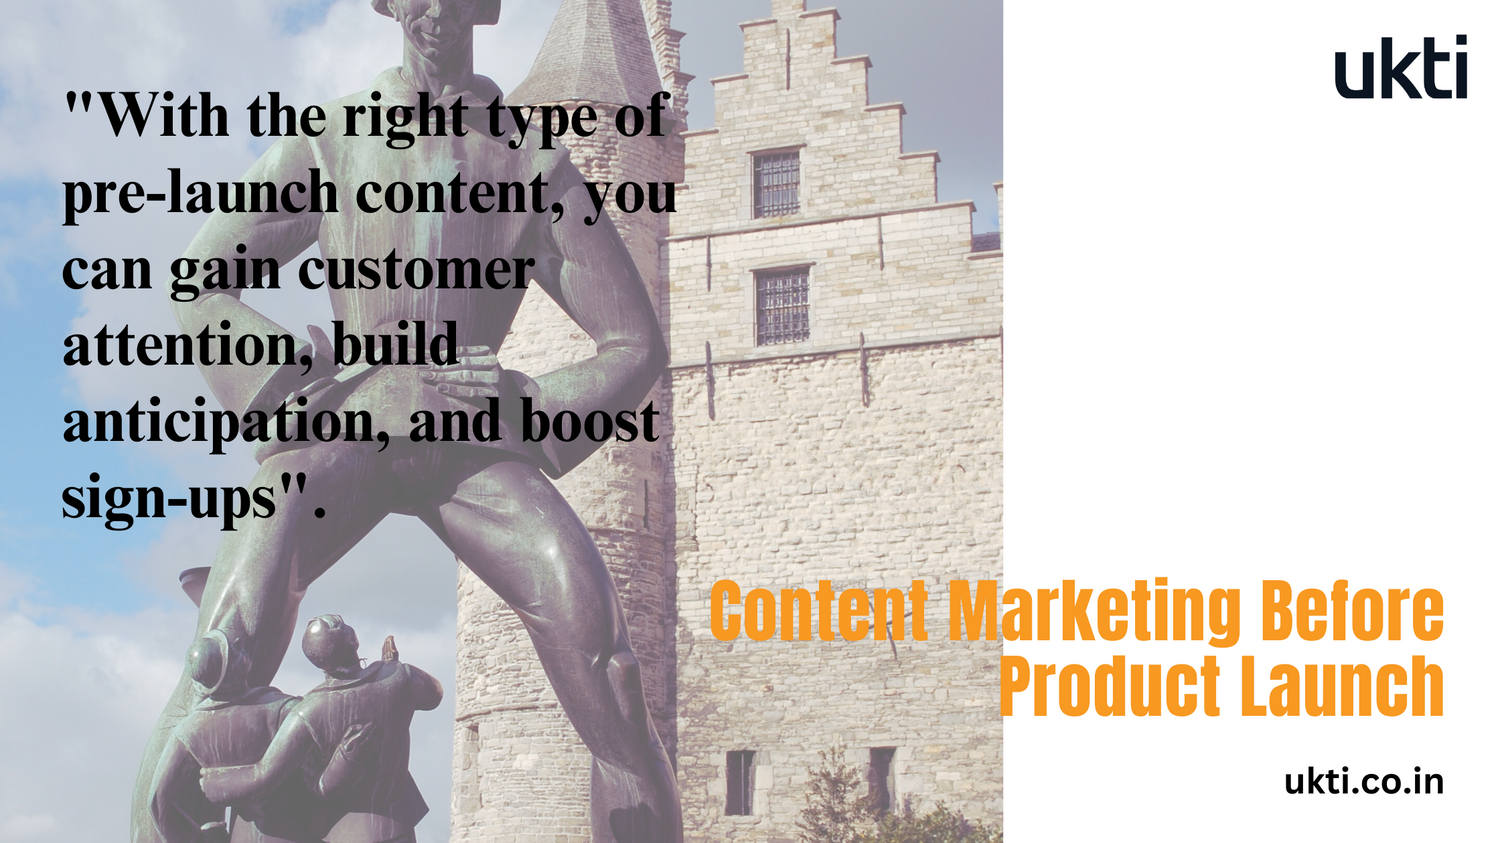 examples of content marketing before product launch